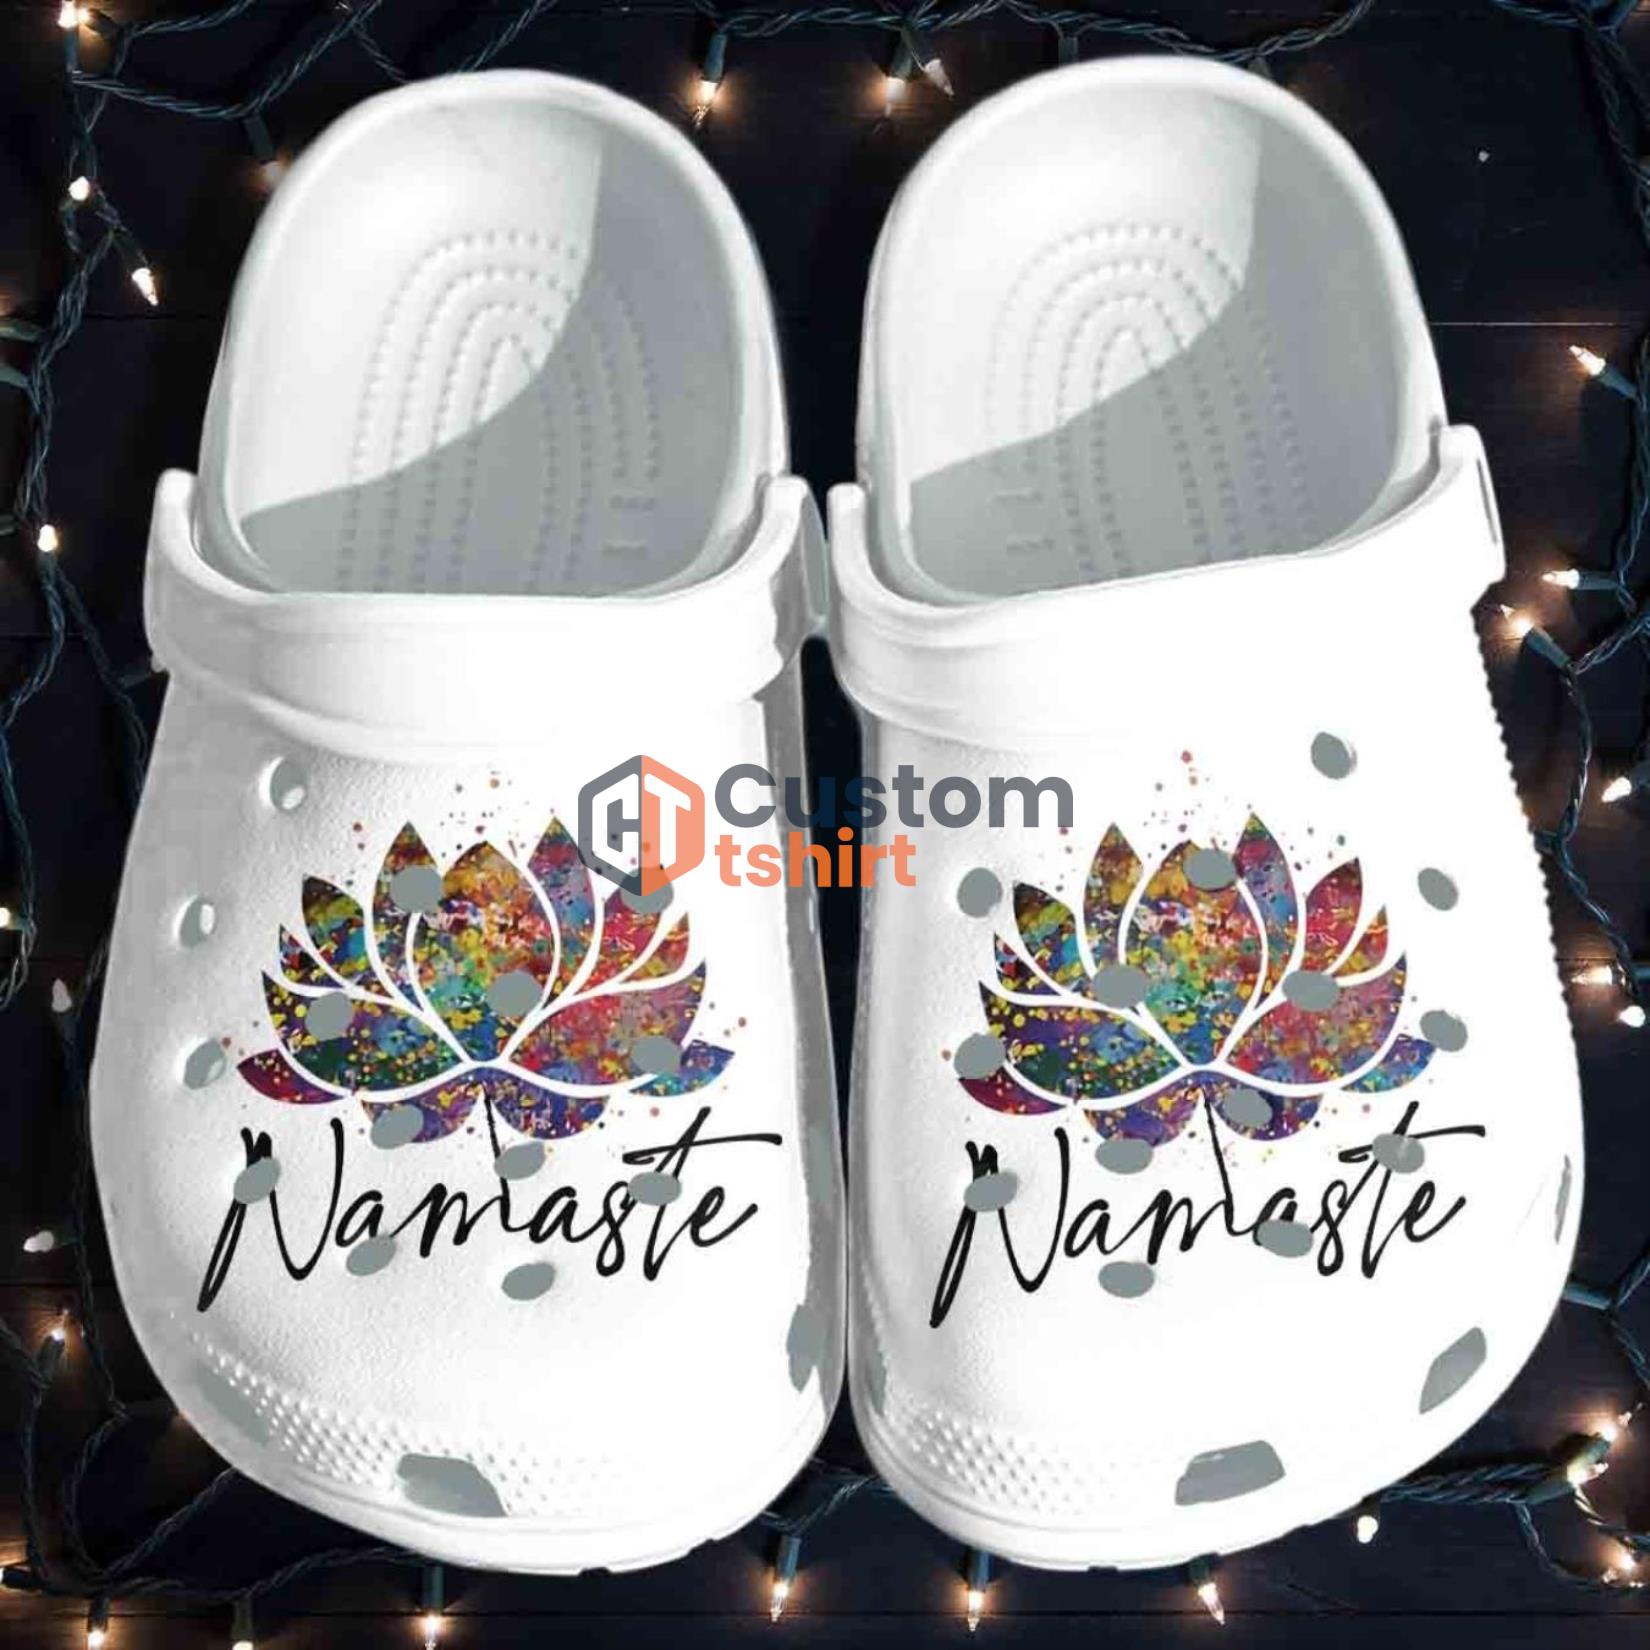 Namaste Lotus Yoga Clog Shoes - Love Light And Peace Clog Shoes Birthday Gift For Women Girl Daughter Friend Product Photo 1 Product photo 1